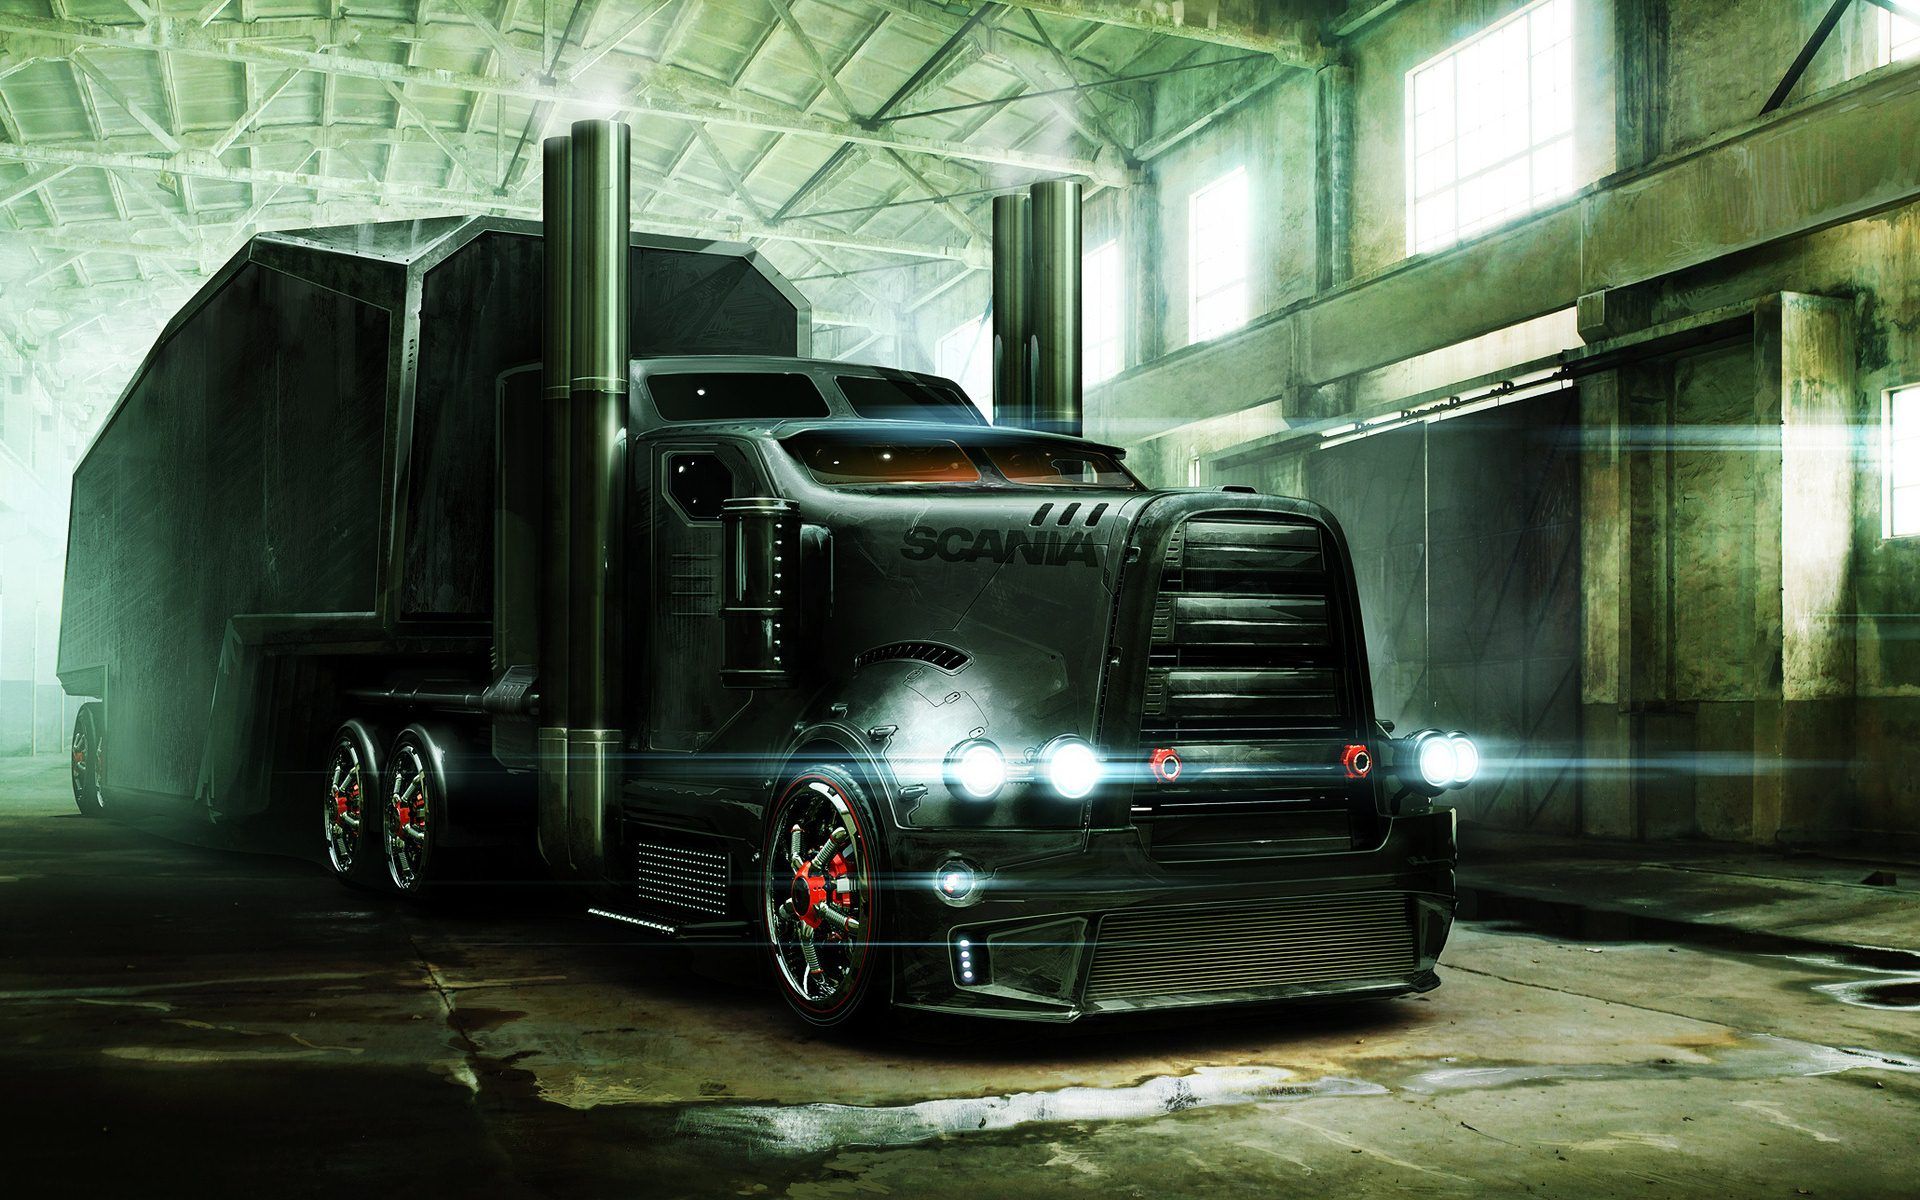 Absolutely Stunning Truck Wallpaper in HD